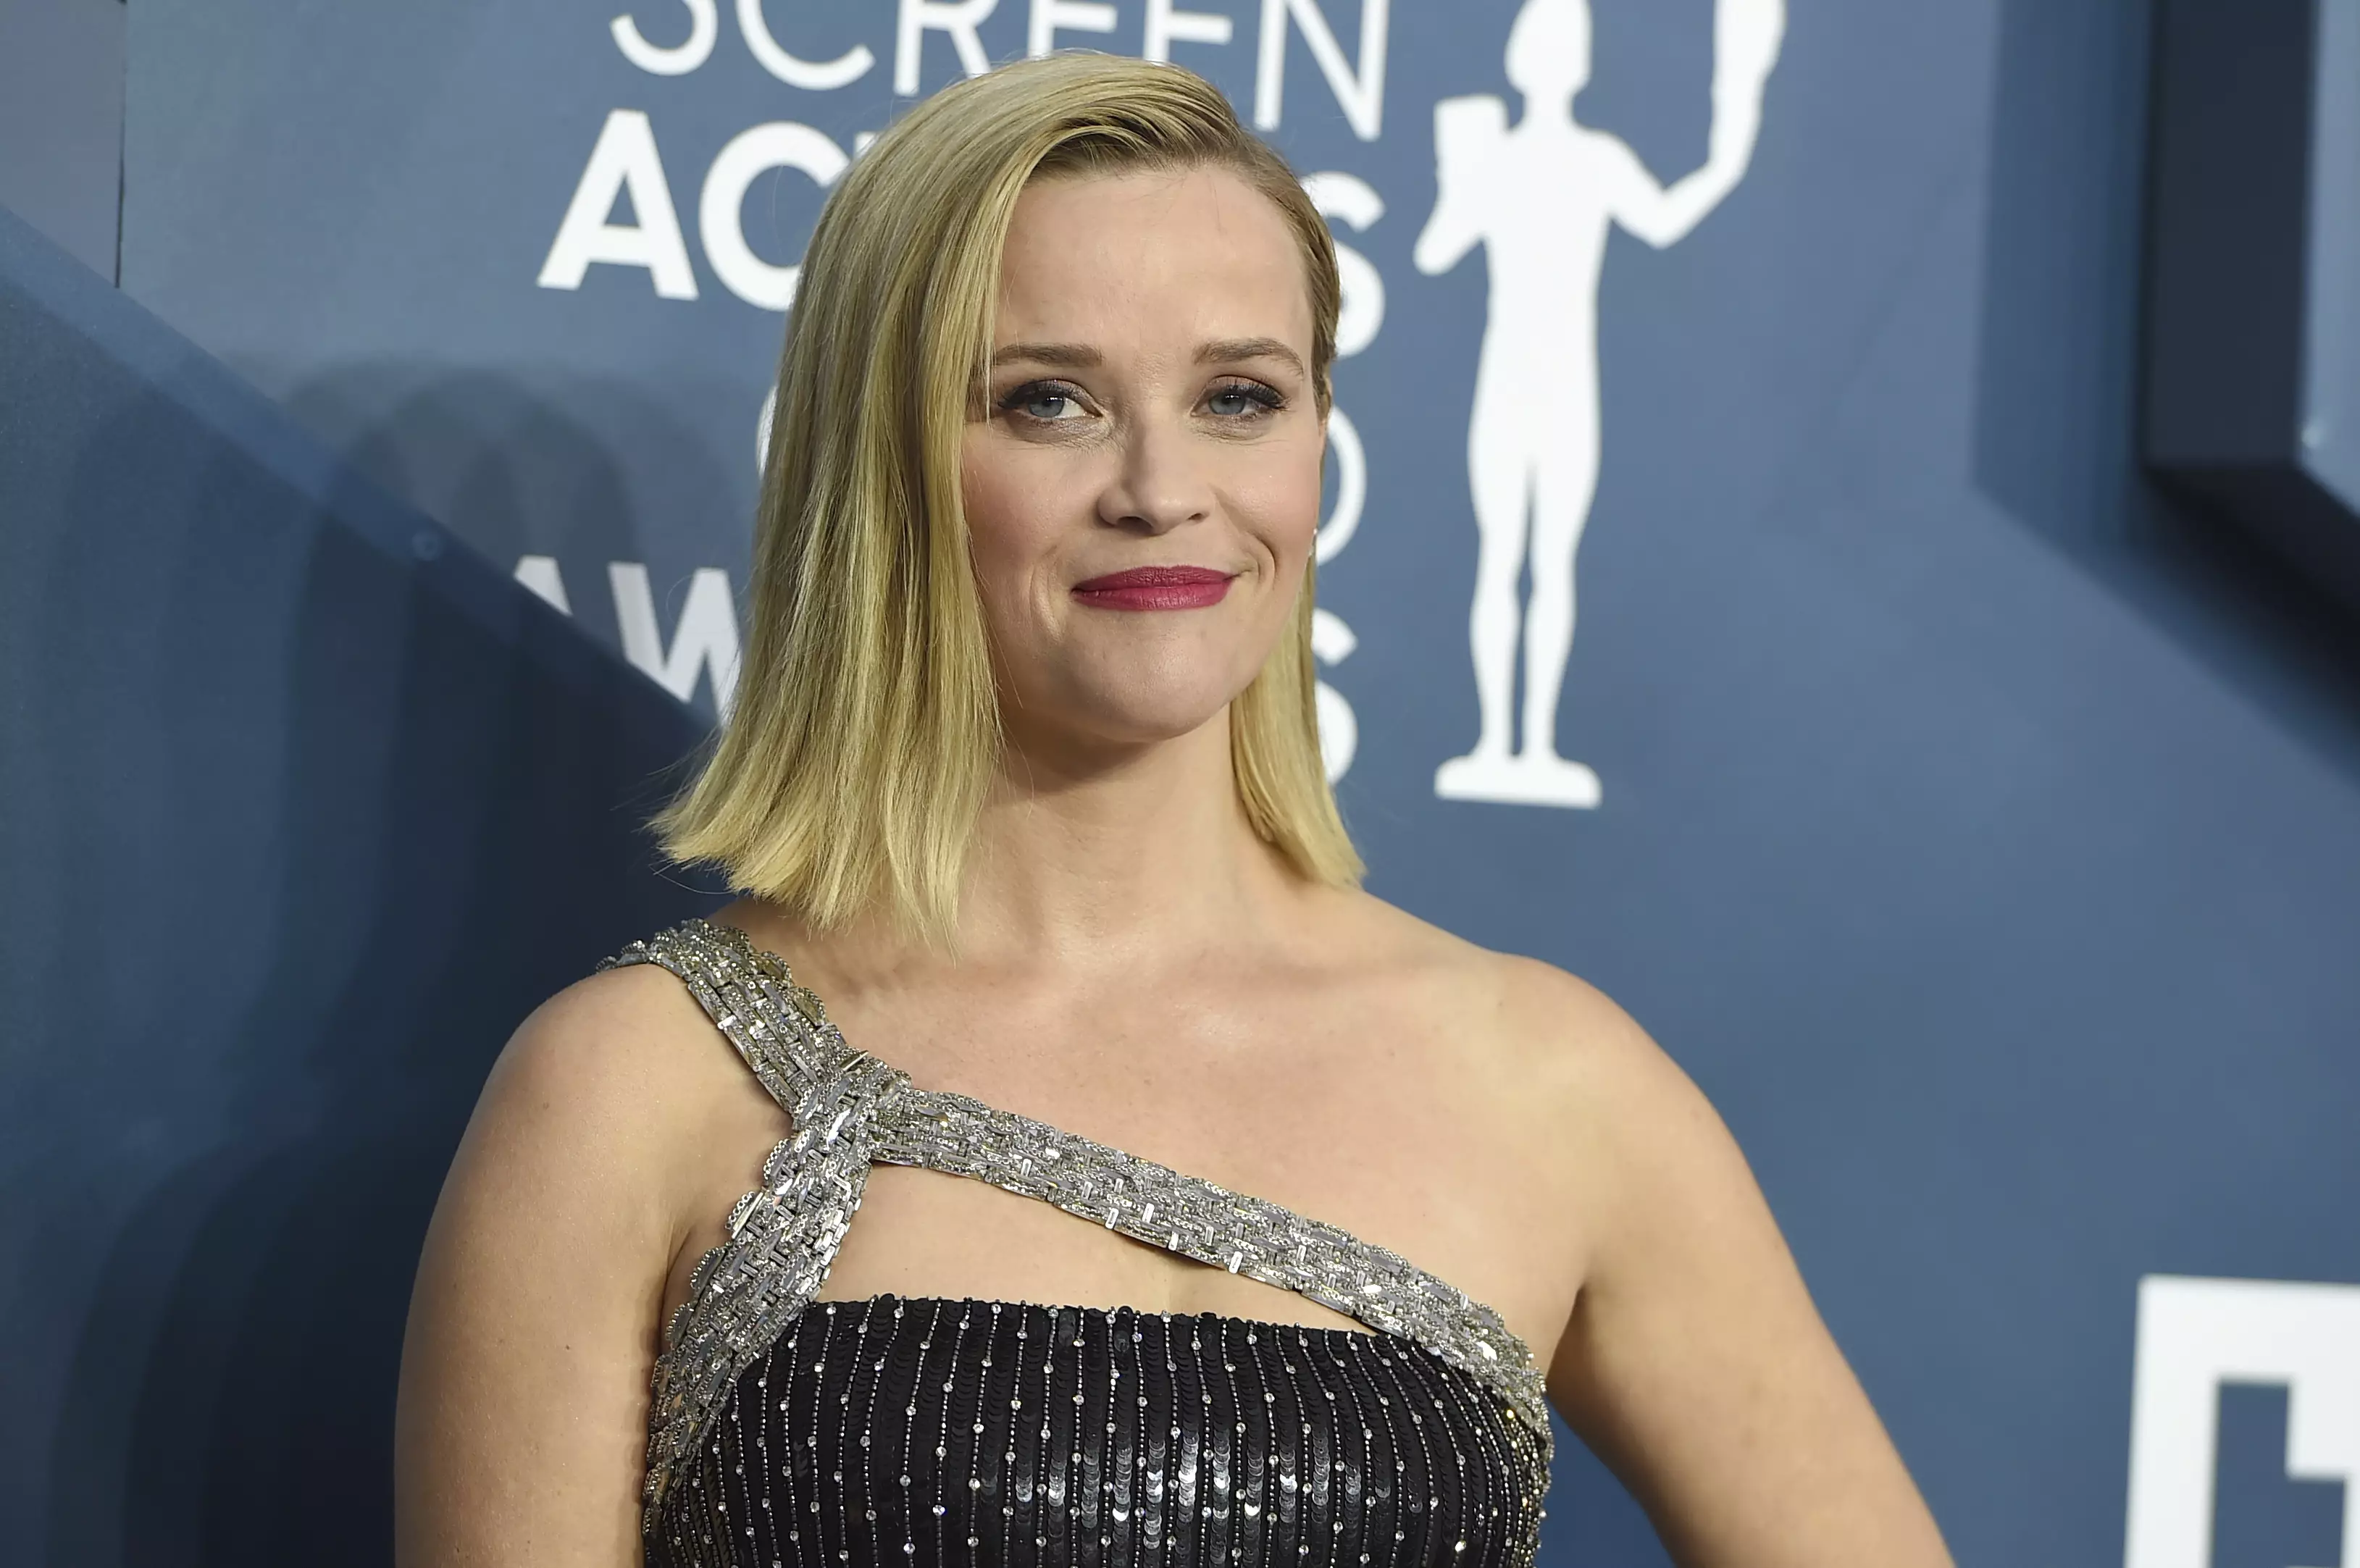 Reese Witherspoon's book club champions books by women and about women (